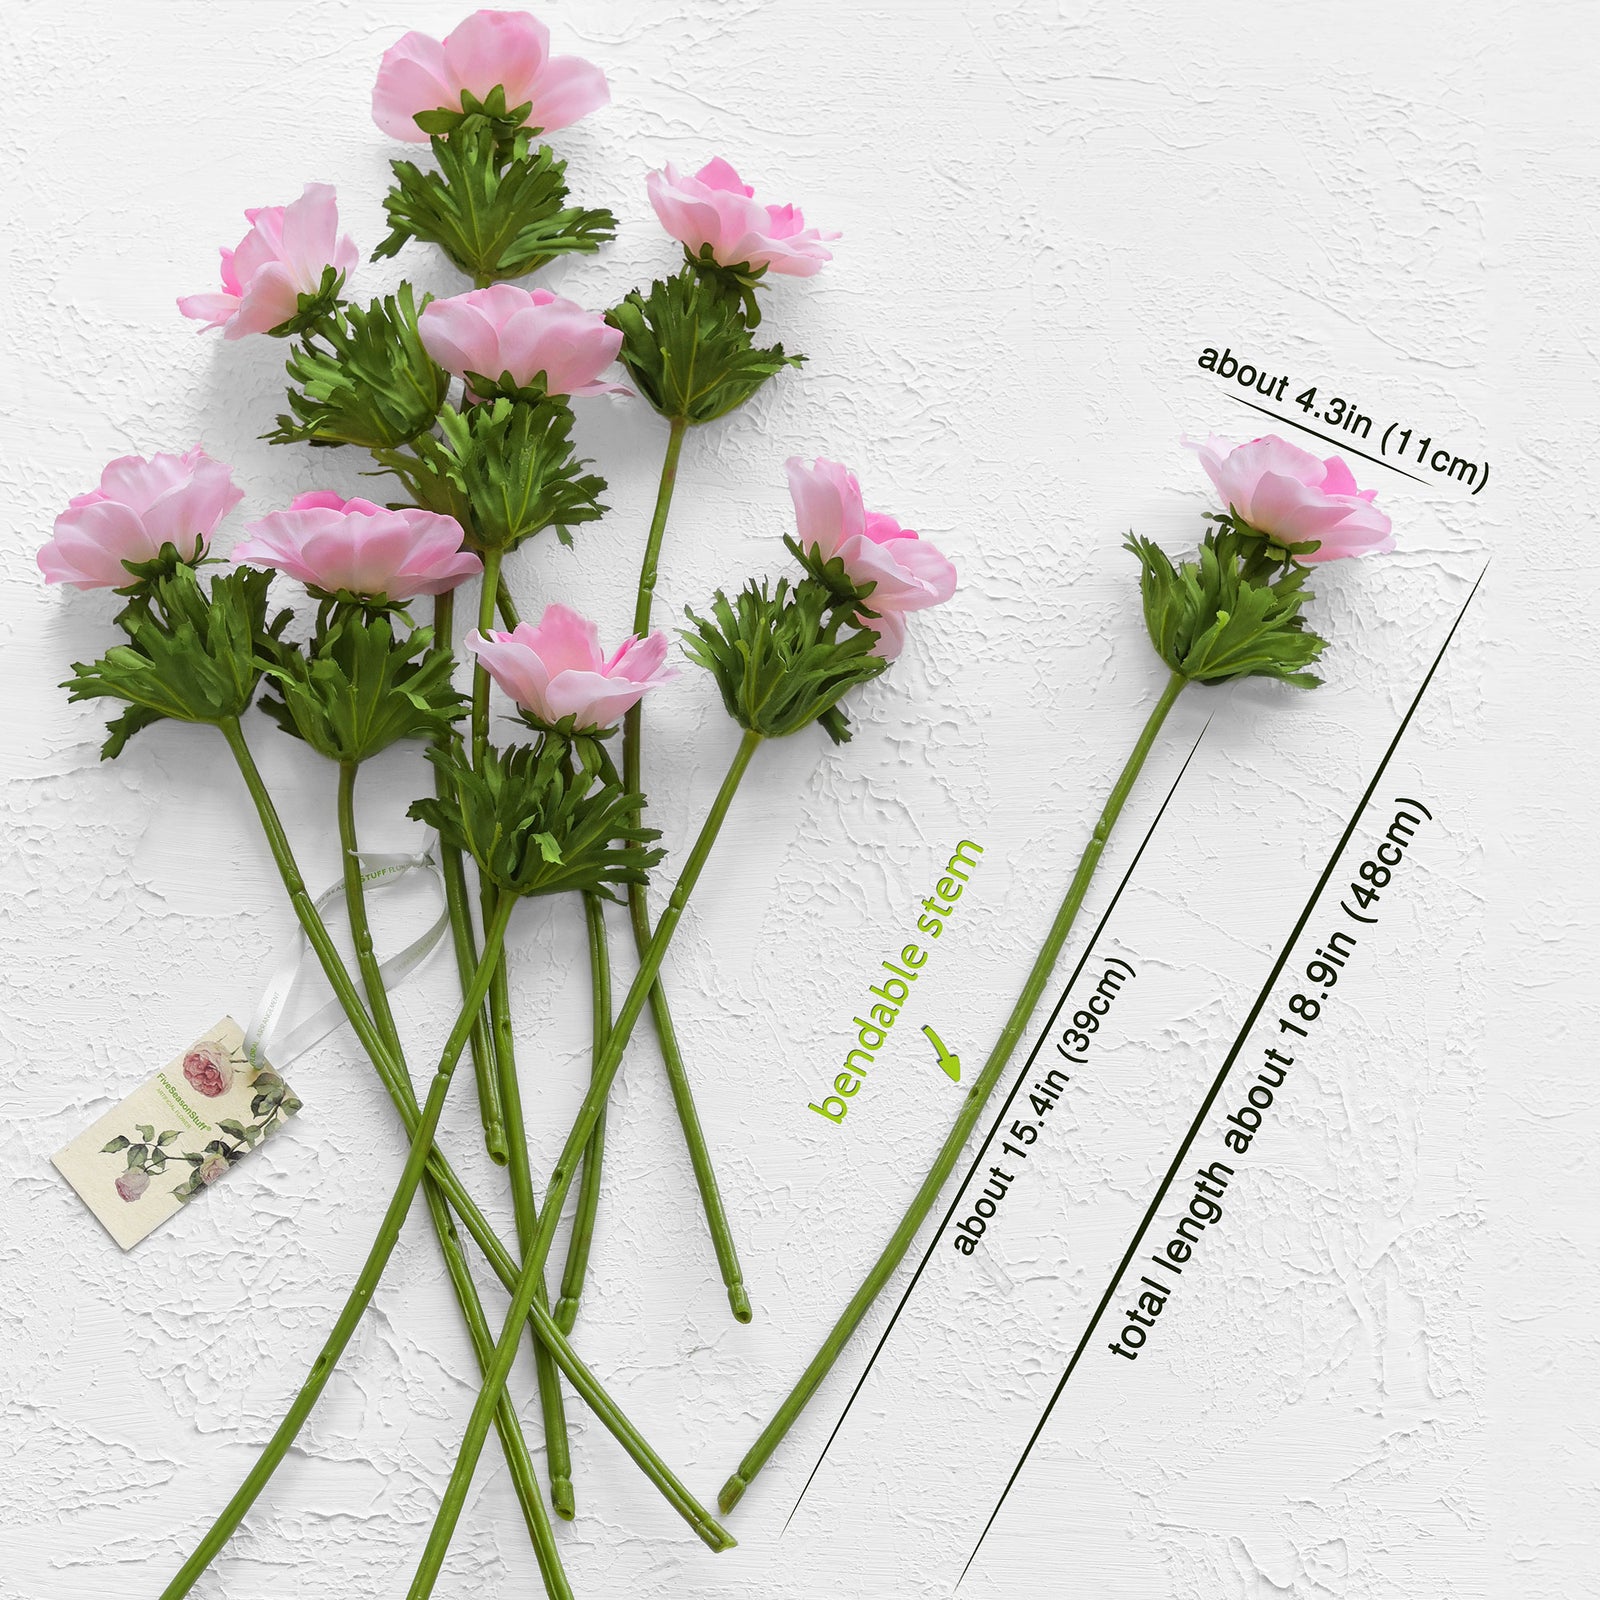 9 Long Stems of ‘Real Touch’ (Refreshing Pink) Artificial Anemone Silk Flowers with Leaves 48cm (18.9 inches)